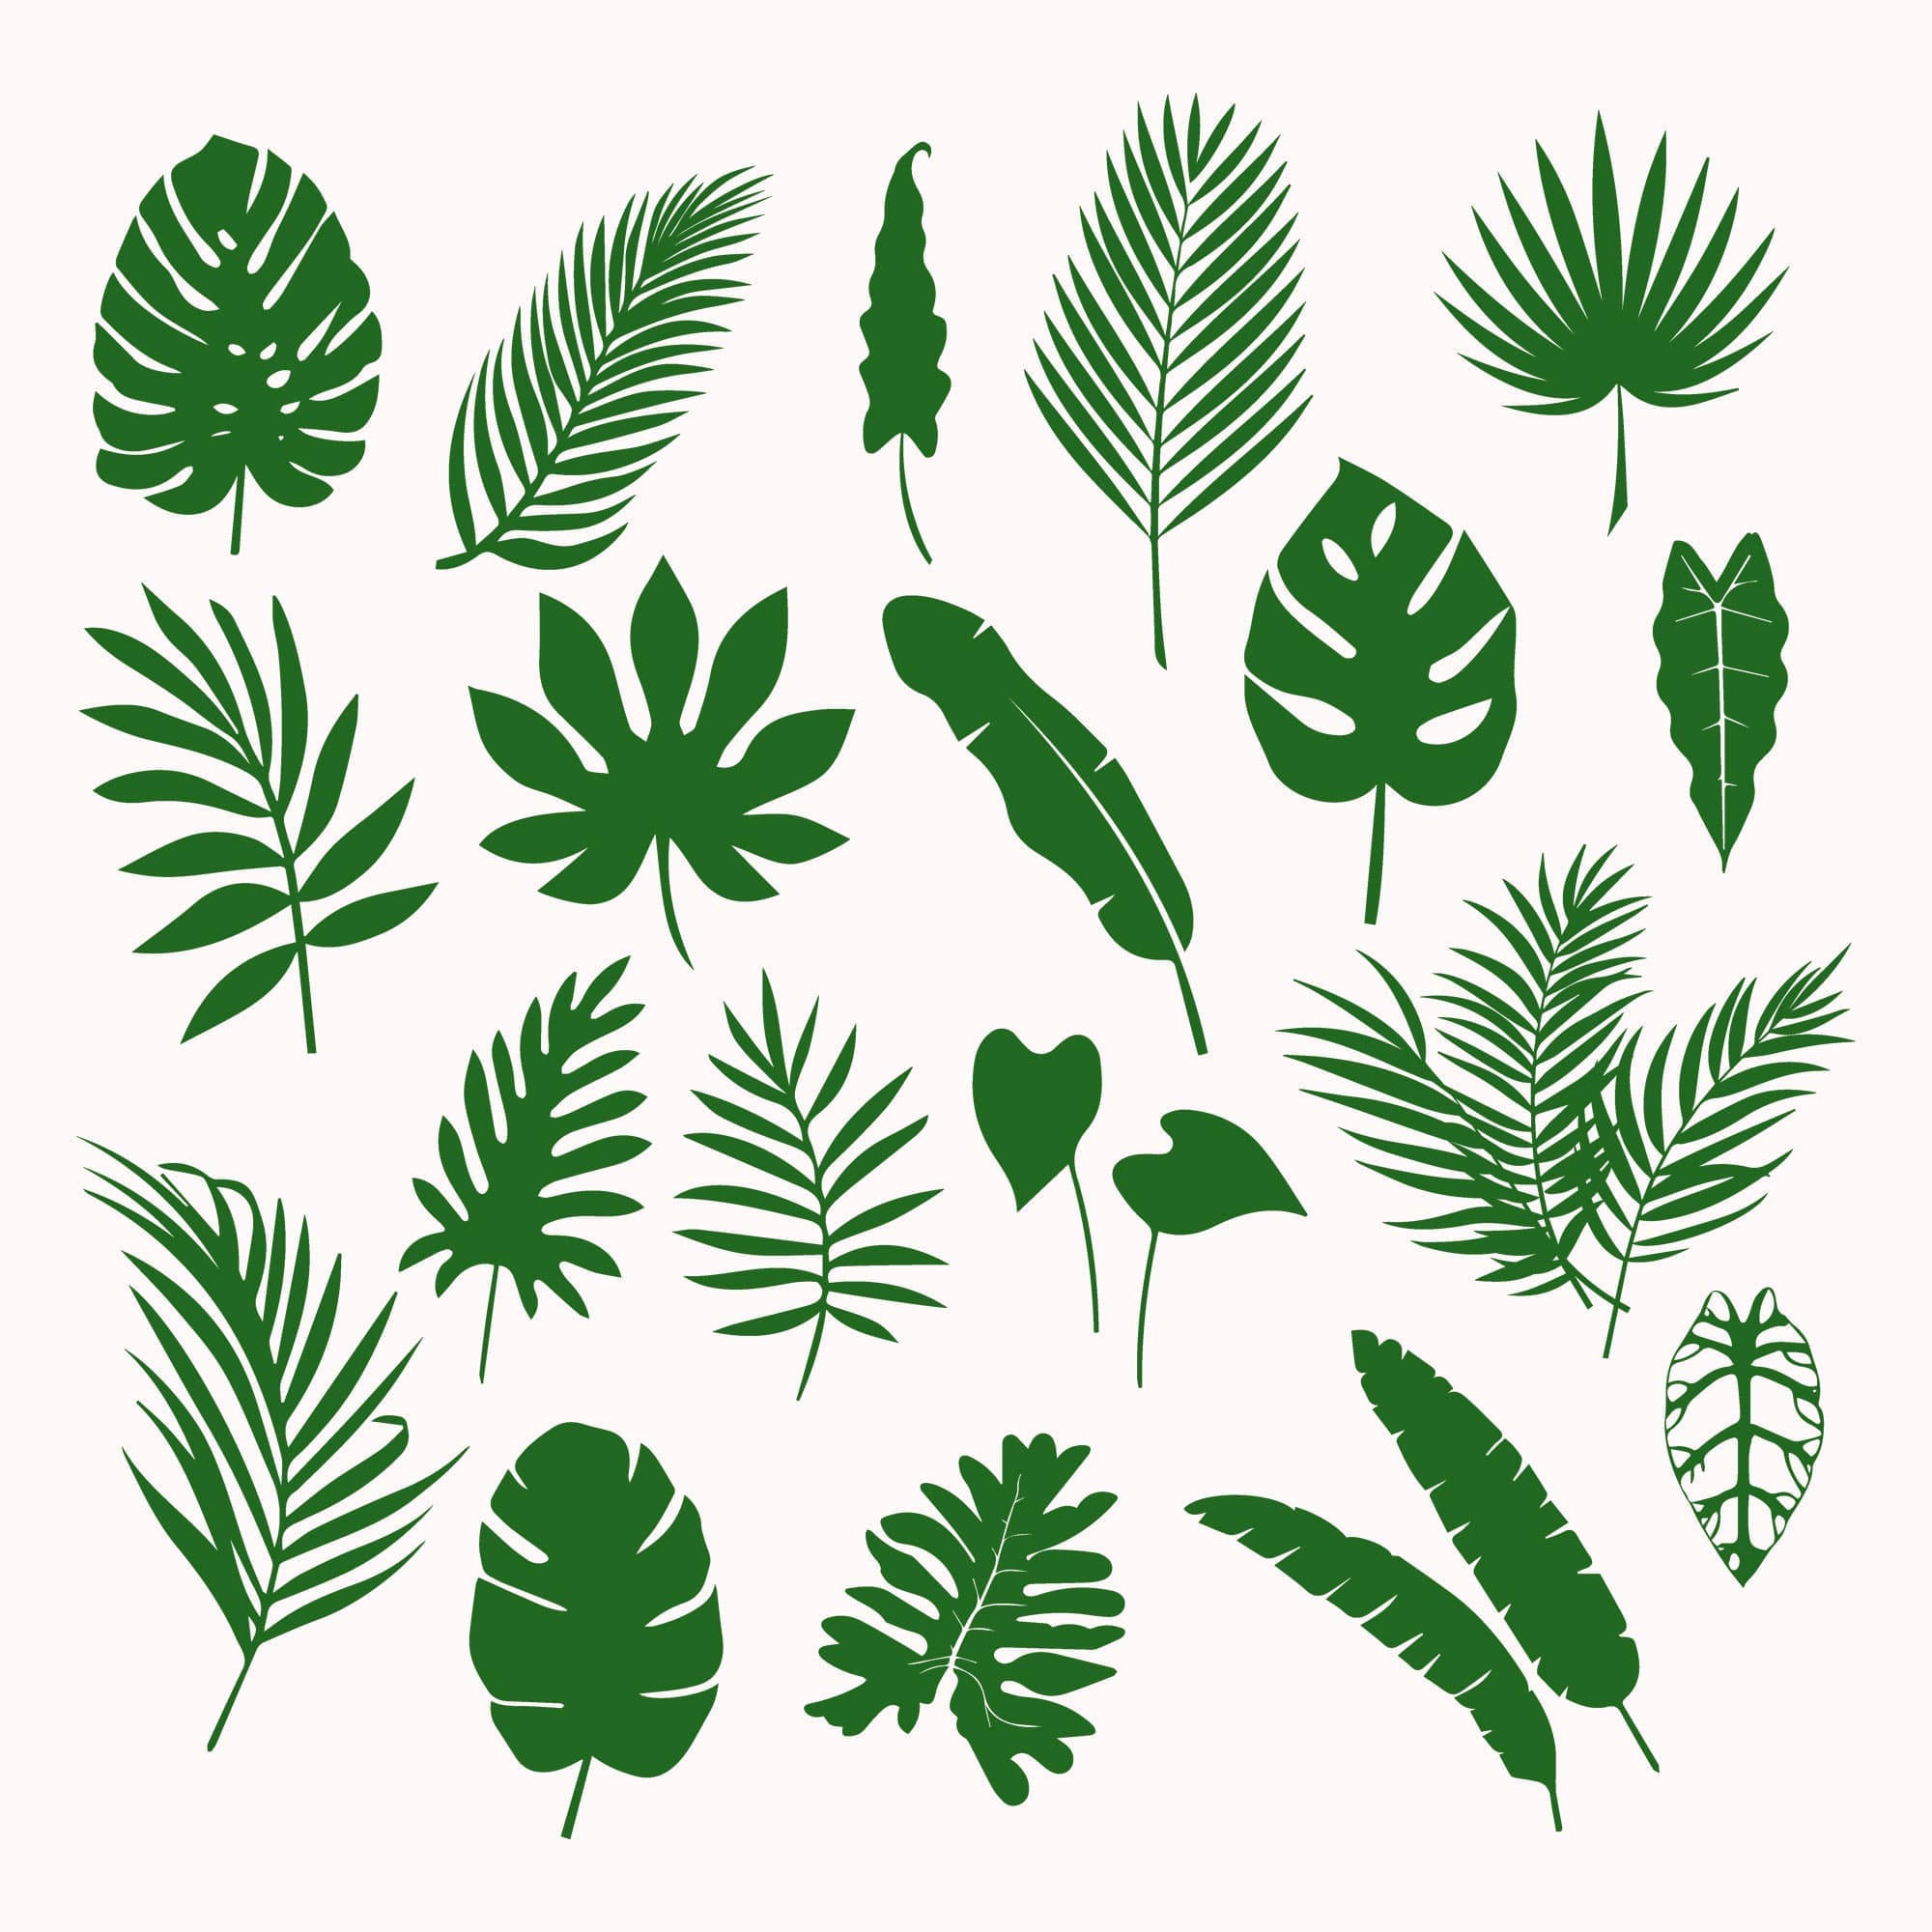 Green tropical leaves from different plants.